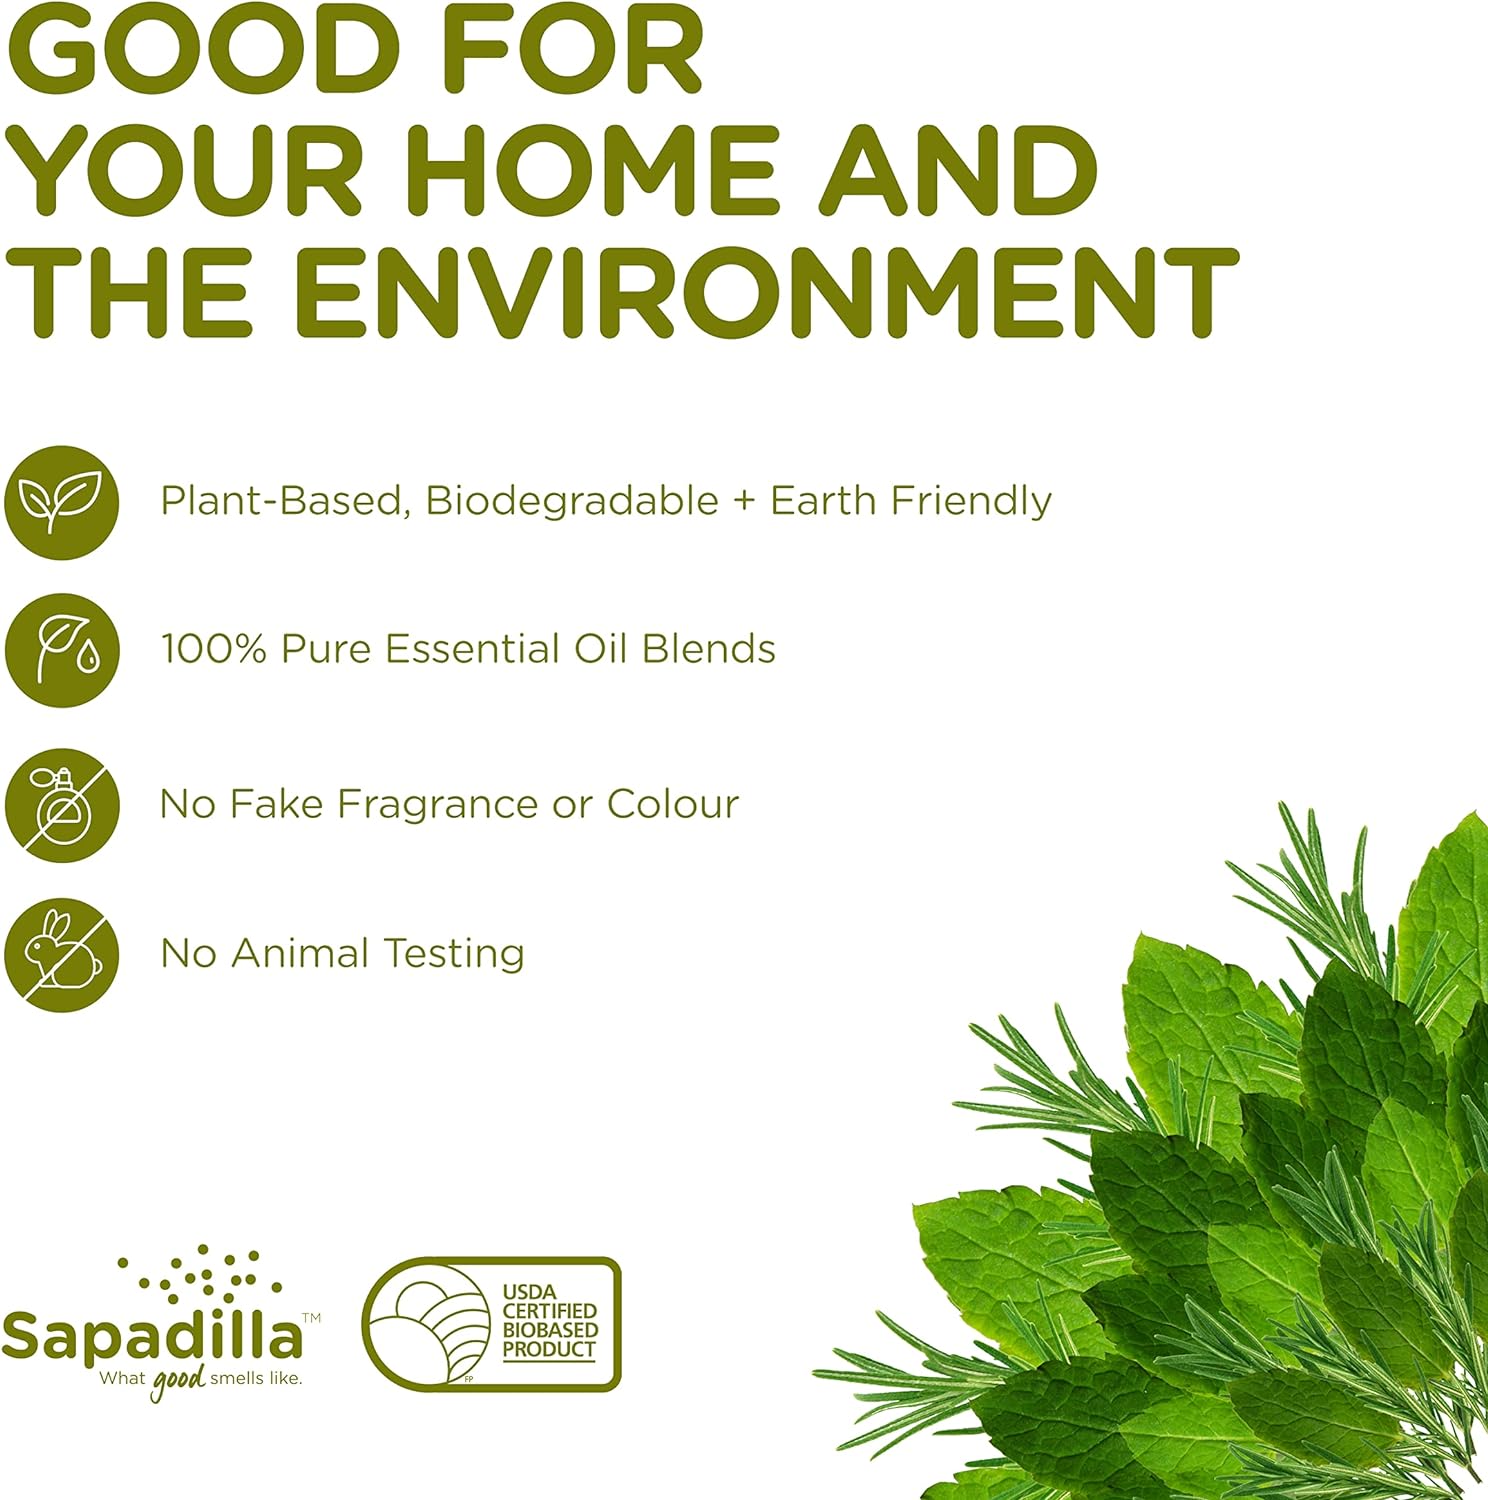 Sapadilla Liquid Dish Soap - Rosemary + Peppermint - Made with 100% Pure Essential Oil Blends, Tough on Grease, Aromatic & Fragrant Dishwashing Liquid, Plant Based, Biodegradable, 12 Ounce (Pack of 1) : Home & Kitchen